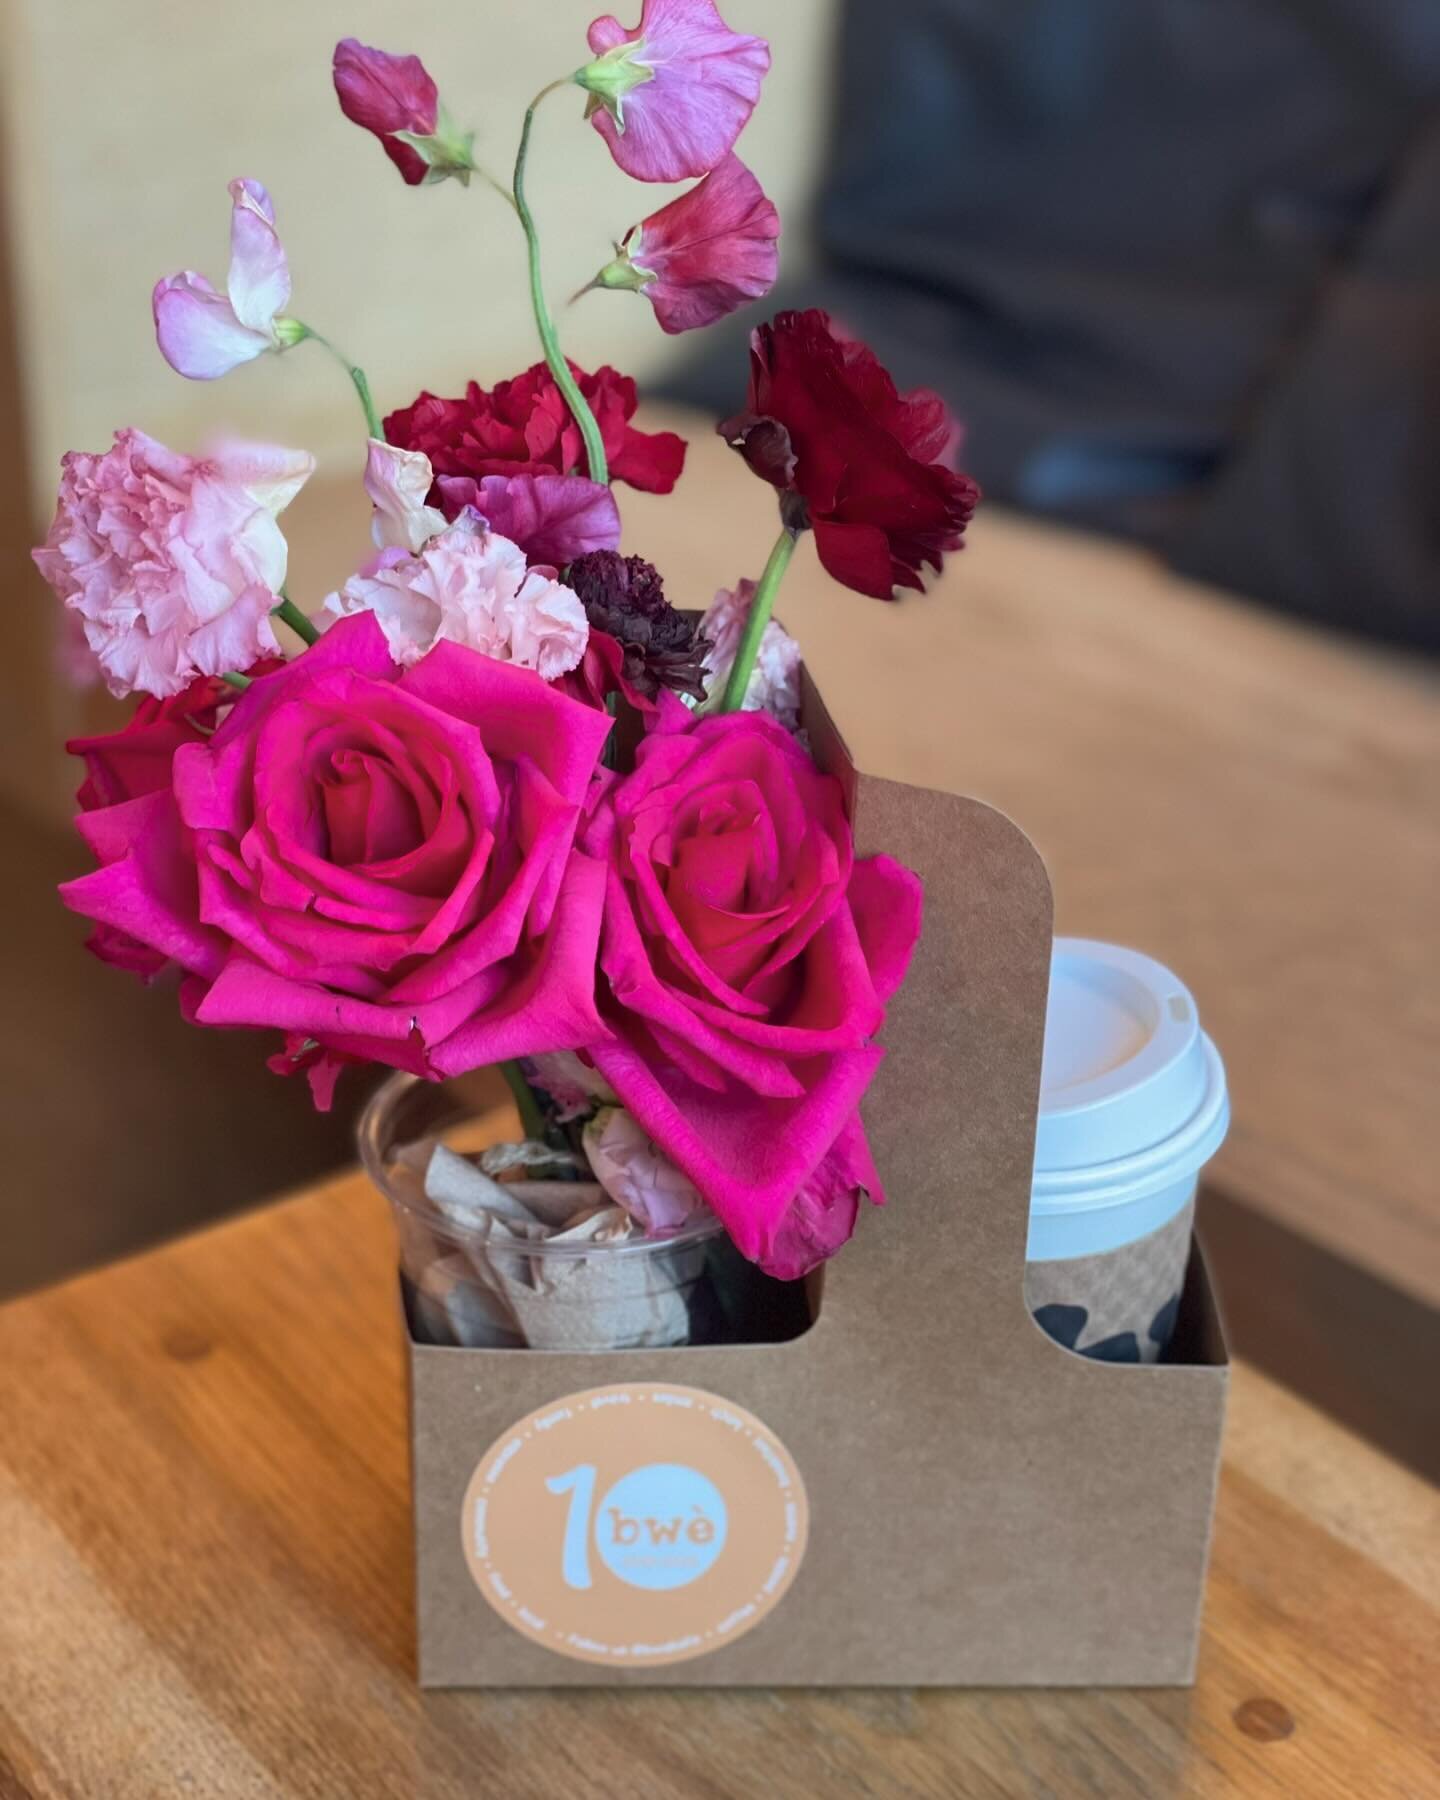 So excited to have teamed up with @madeofleaves for the Valentine&rsquo;s season!! Together we have created the cutest surprise of your person&rsquo;s favorite morning drink and the most beautiful little fresh bouquet of flowers. Though these $20 gif